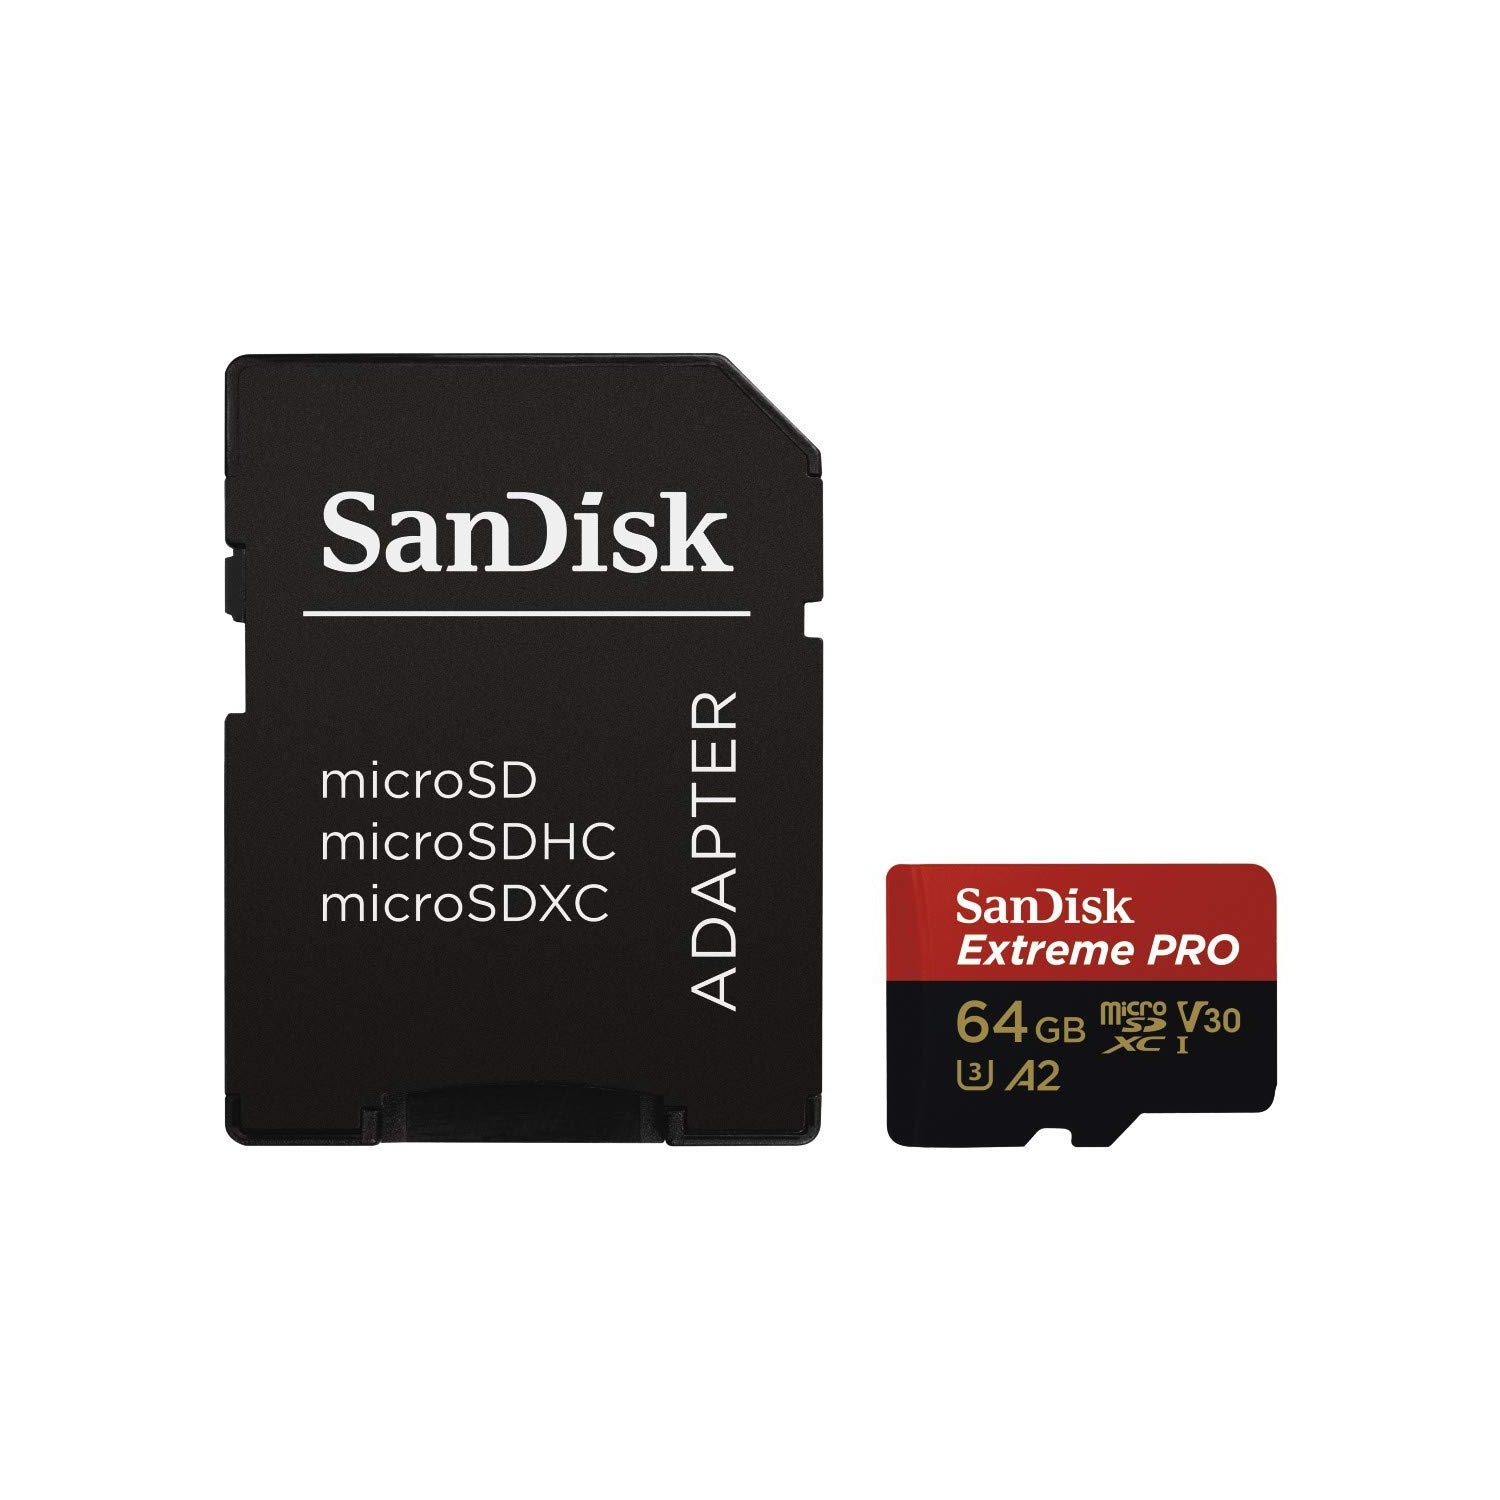 SanDisk Extreme PRO 64GB U3 A2 Micro SD Card with Adapter SDSQXCY-064G